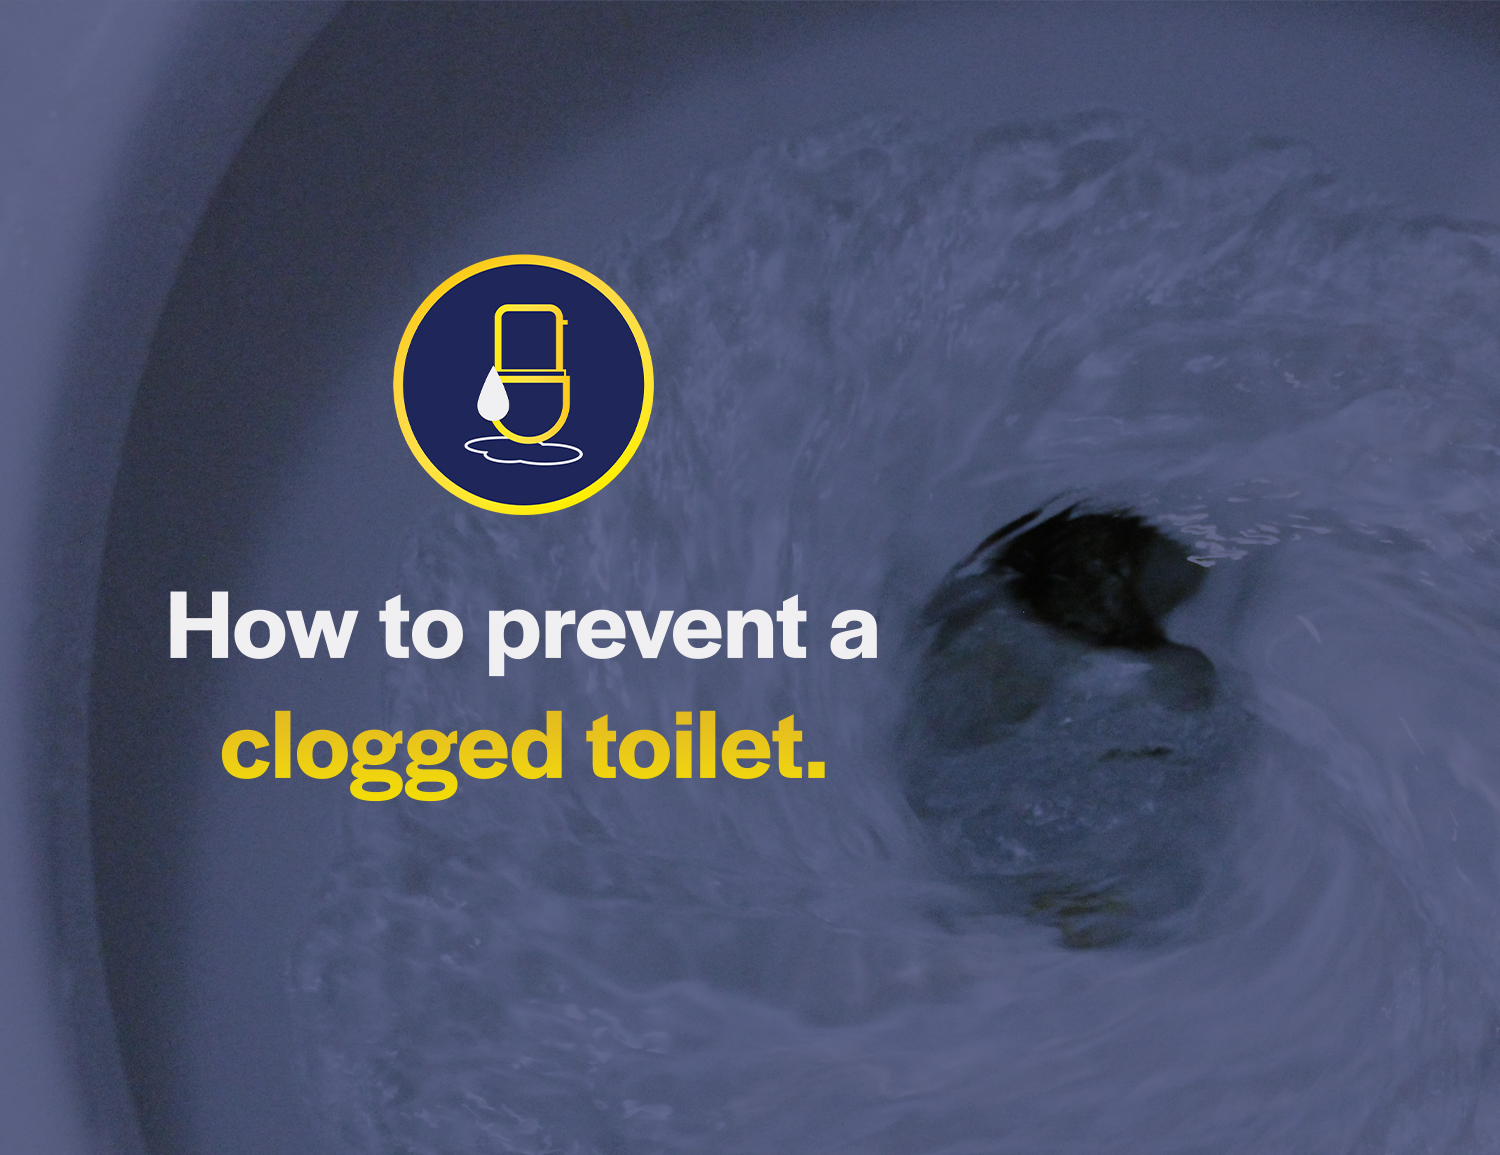 How to prevent a clogged toilet